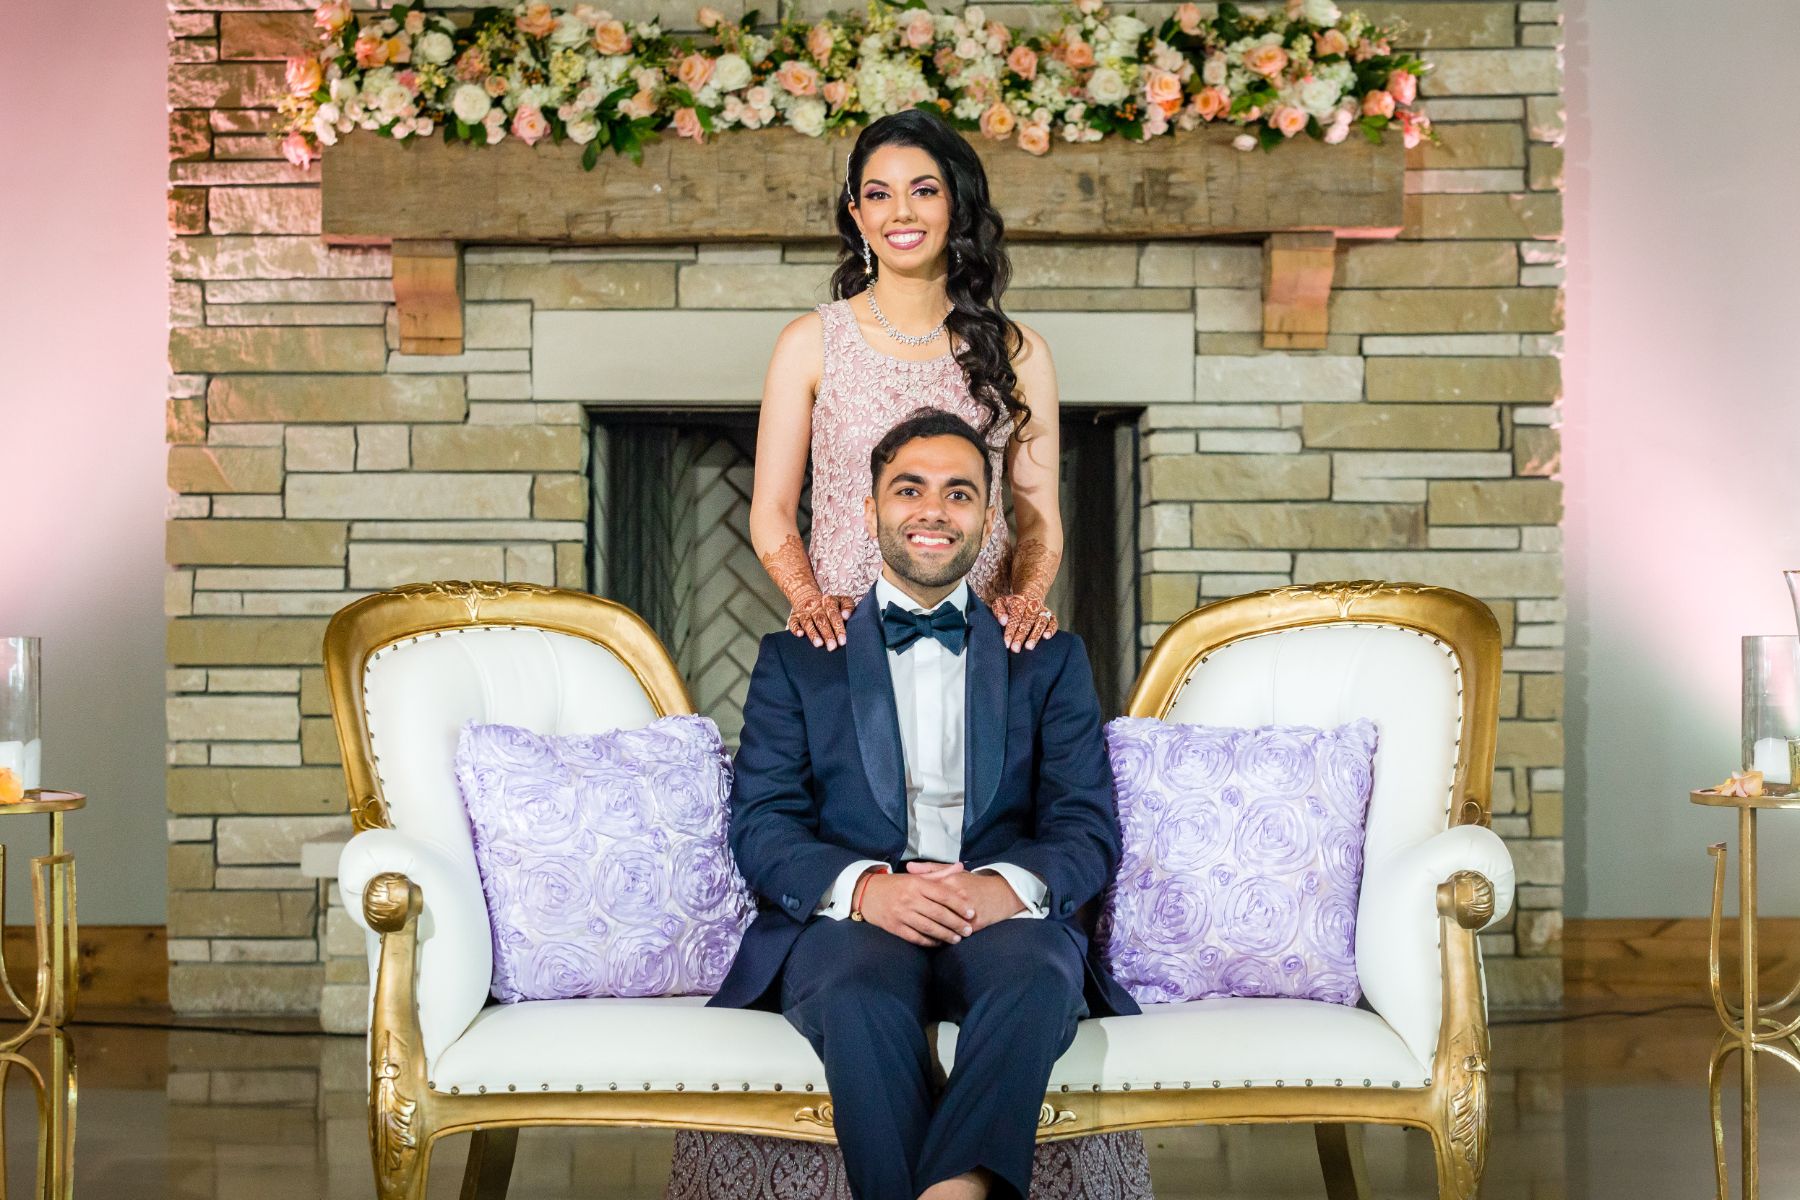 A bride stands behind a groom, sitting on a vintage, white and gold couch with a stone fireplace in the background at a Canyonwood Ridge Wedding.